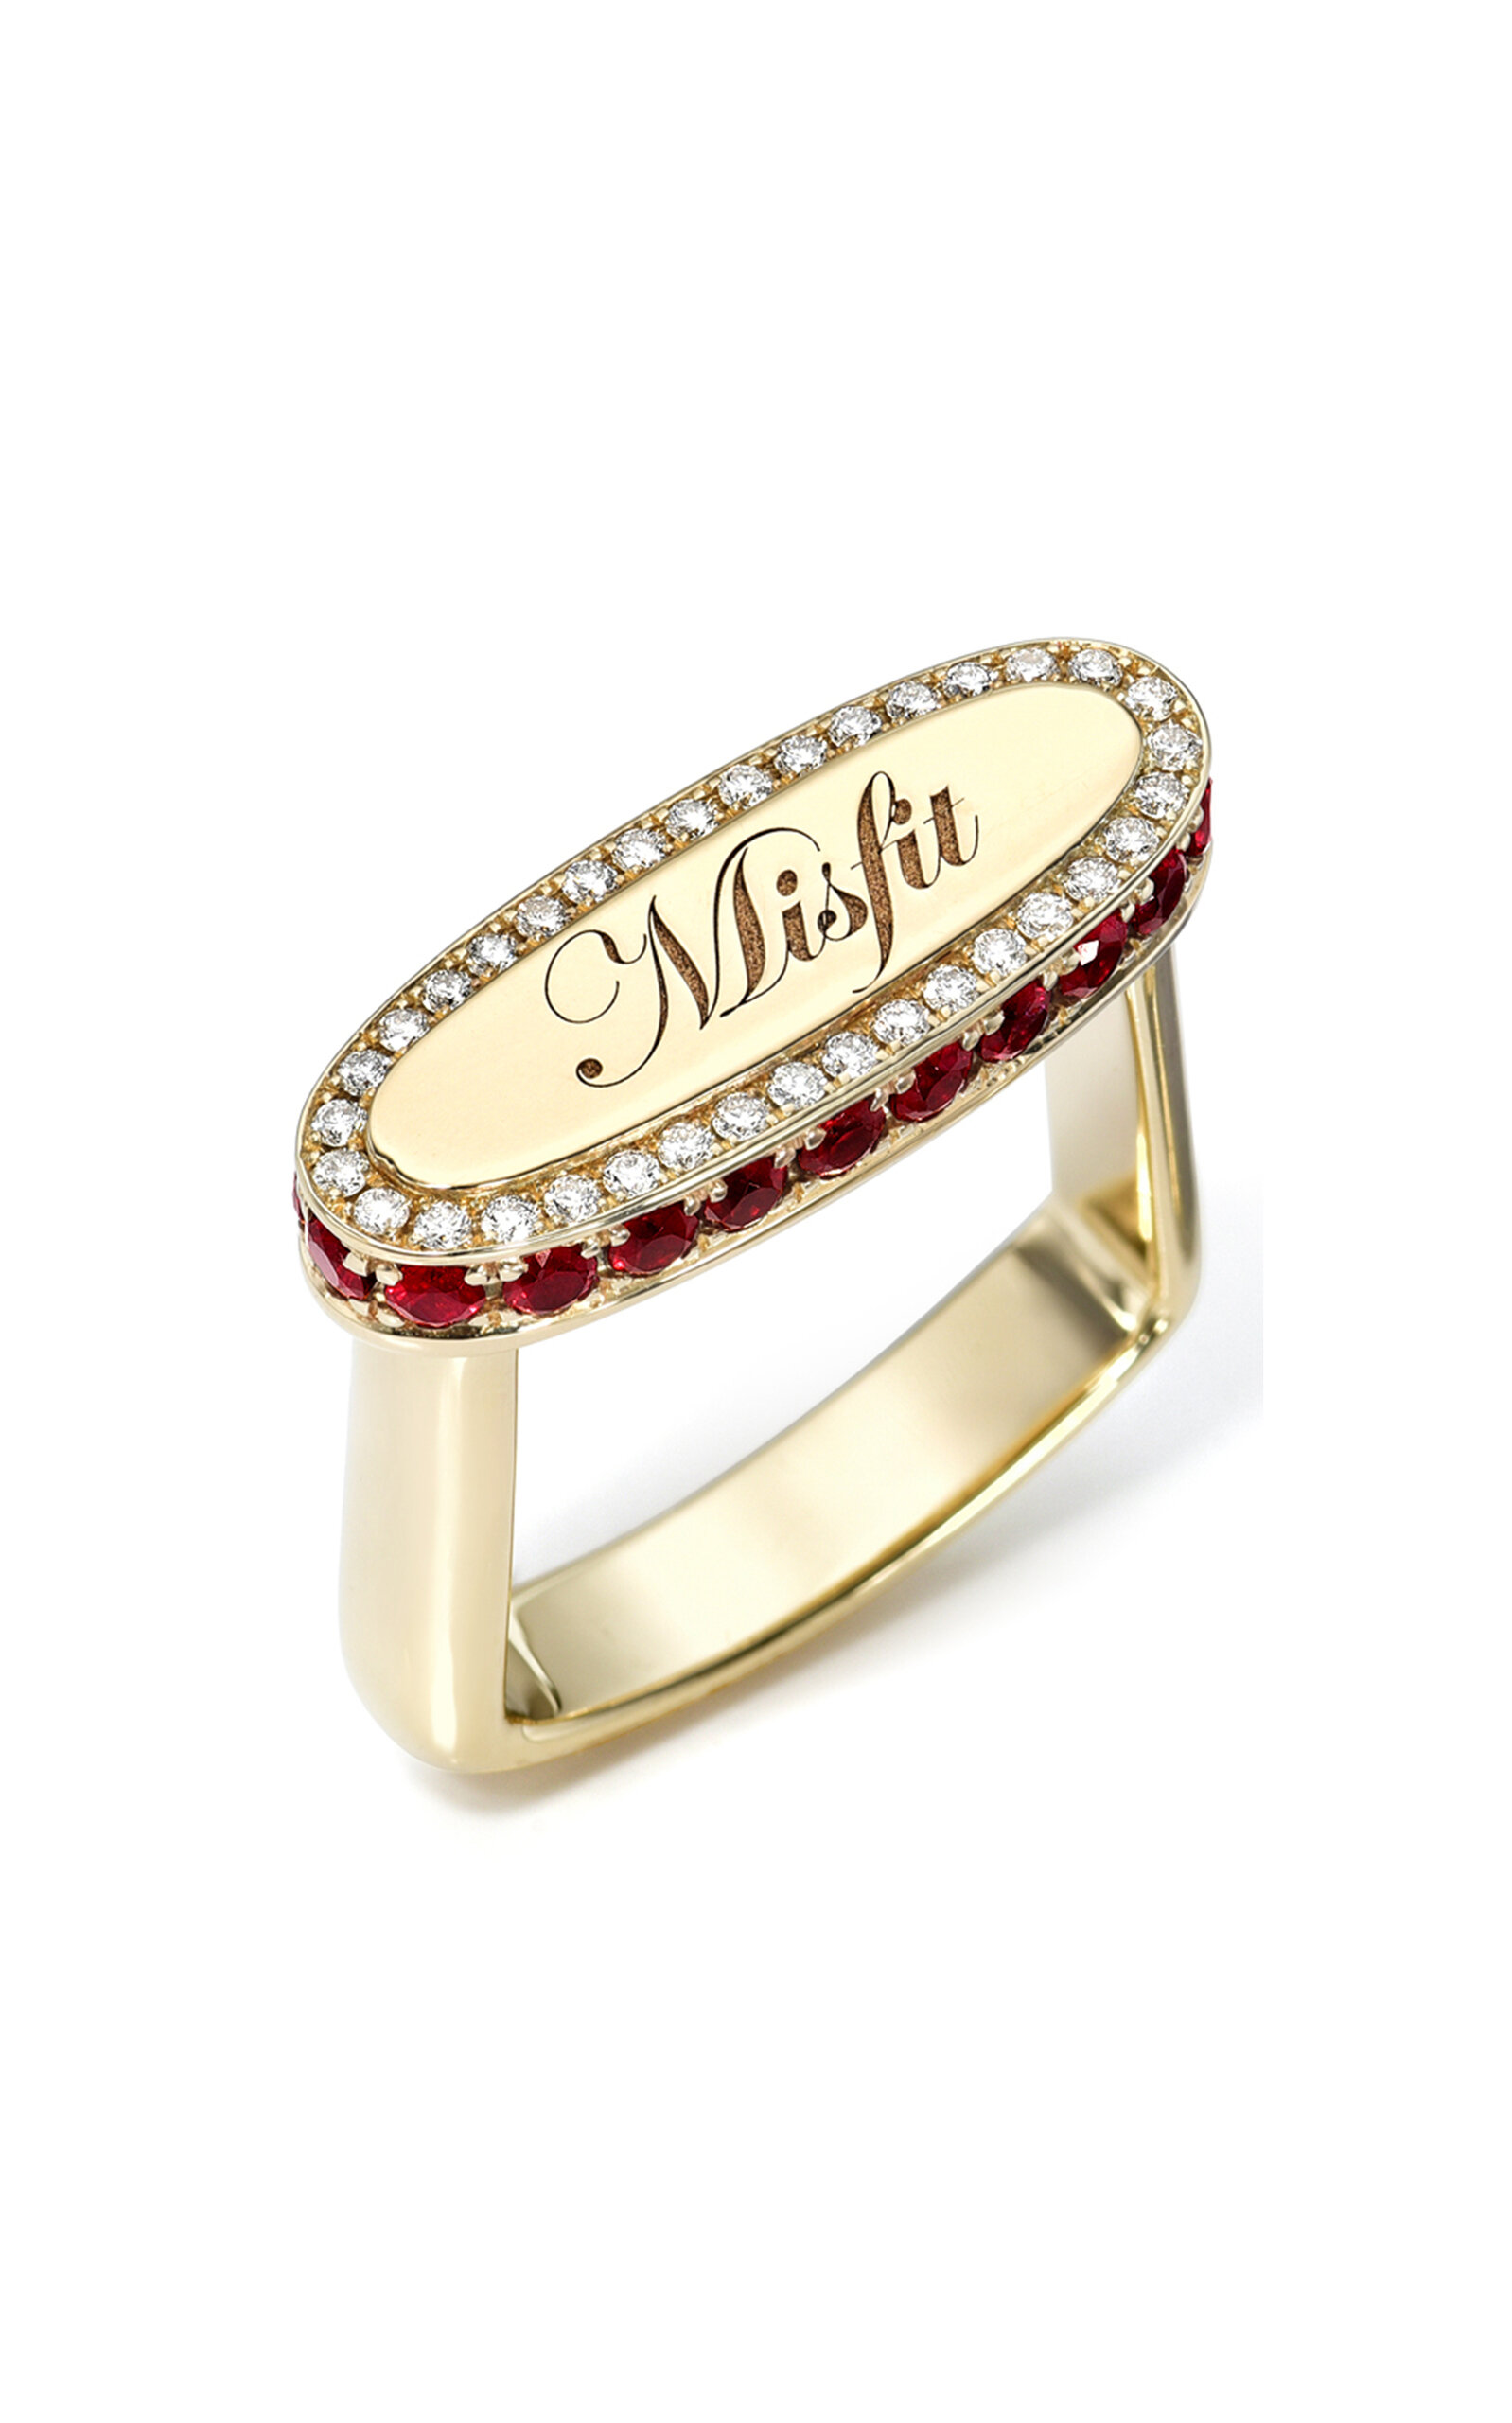 14K Yellow Gold Diamond and Ruby Misfit Signet Ring